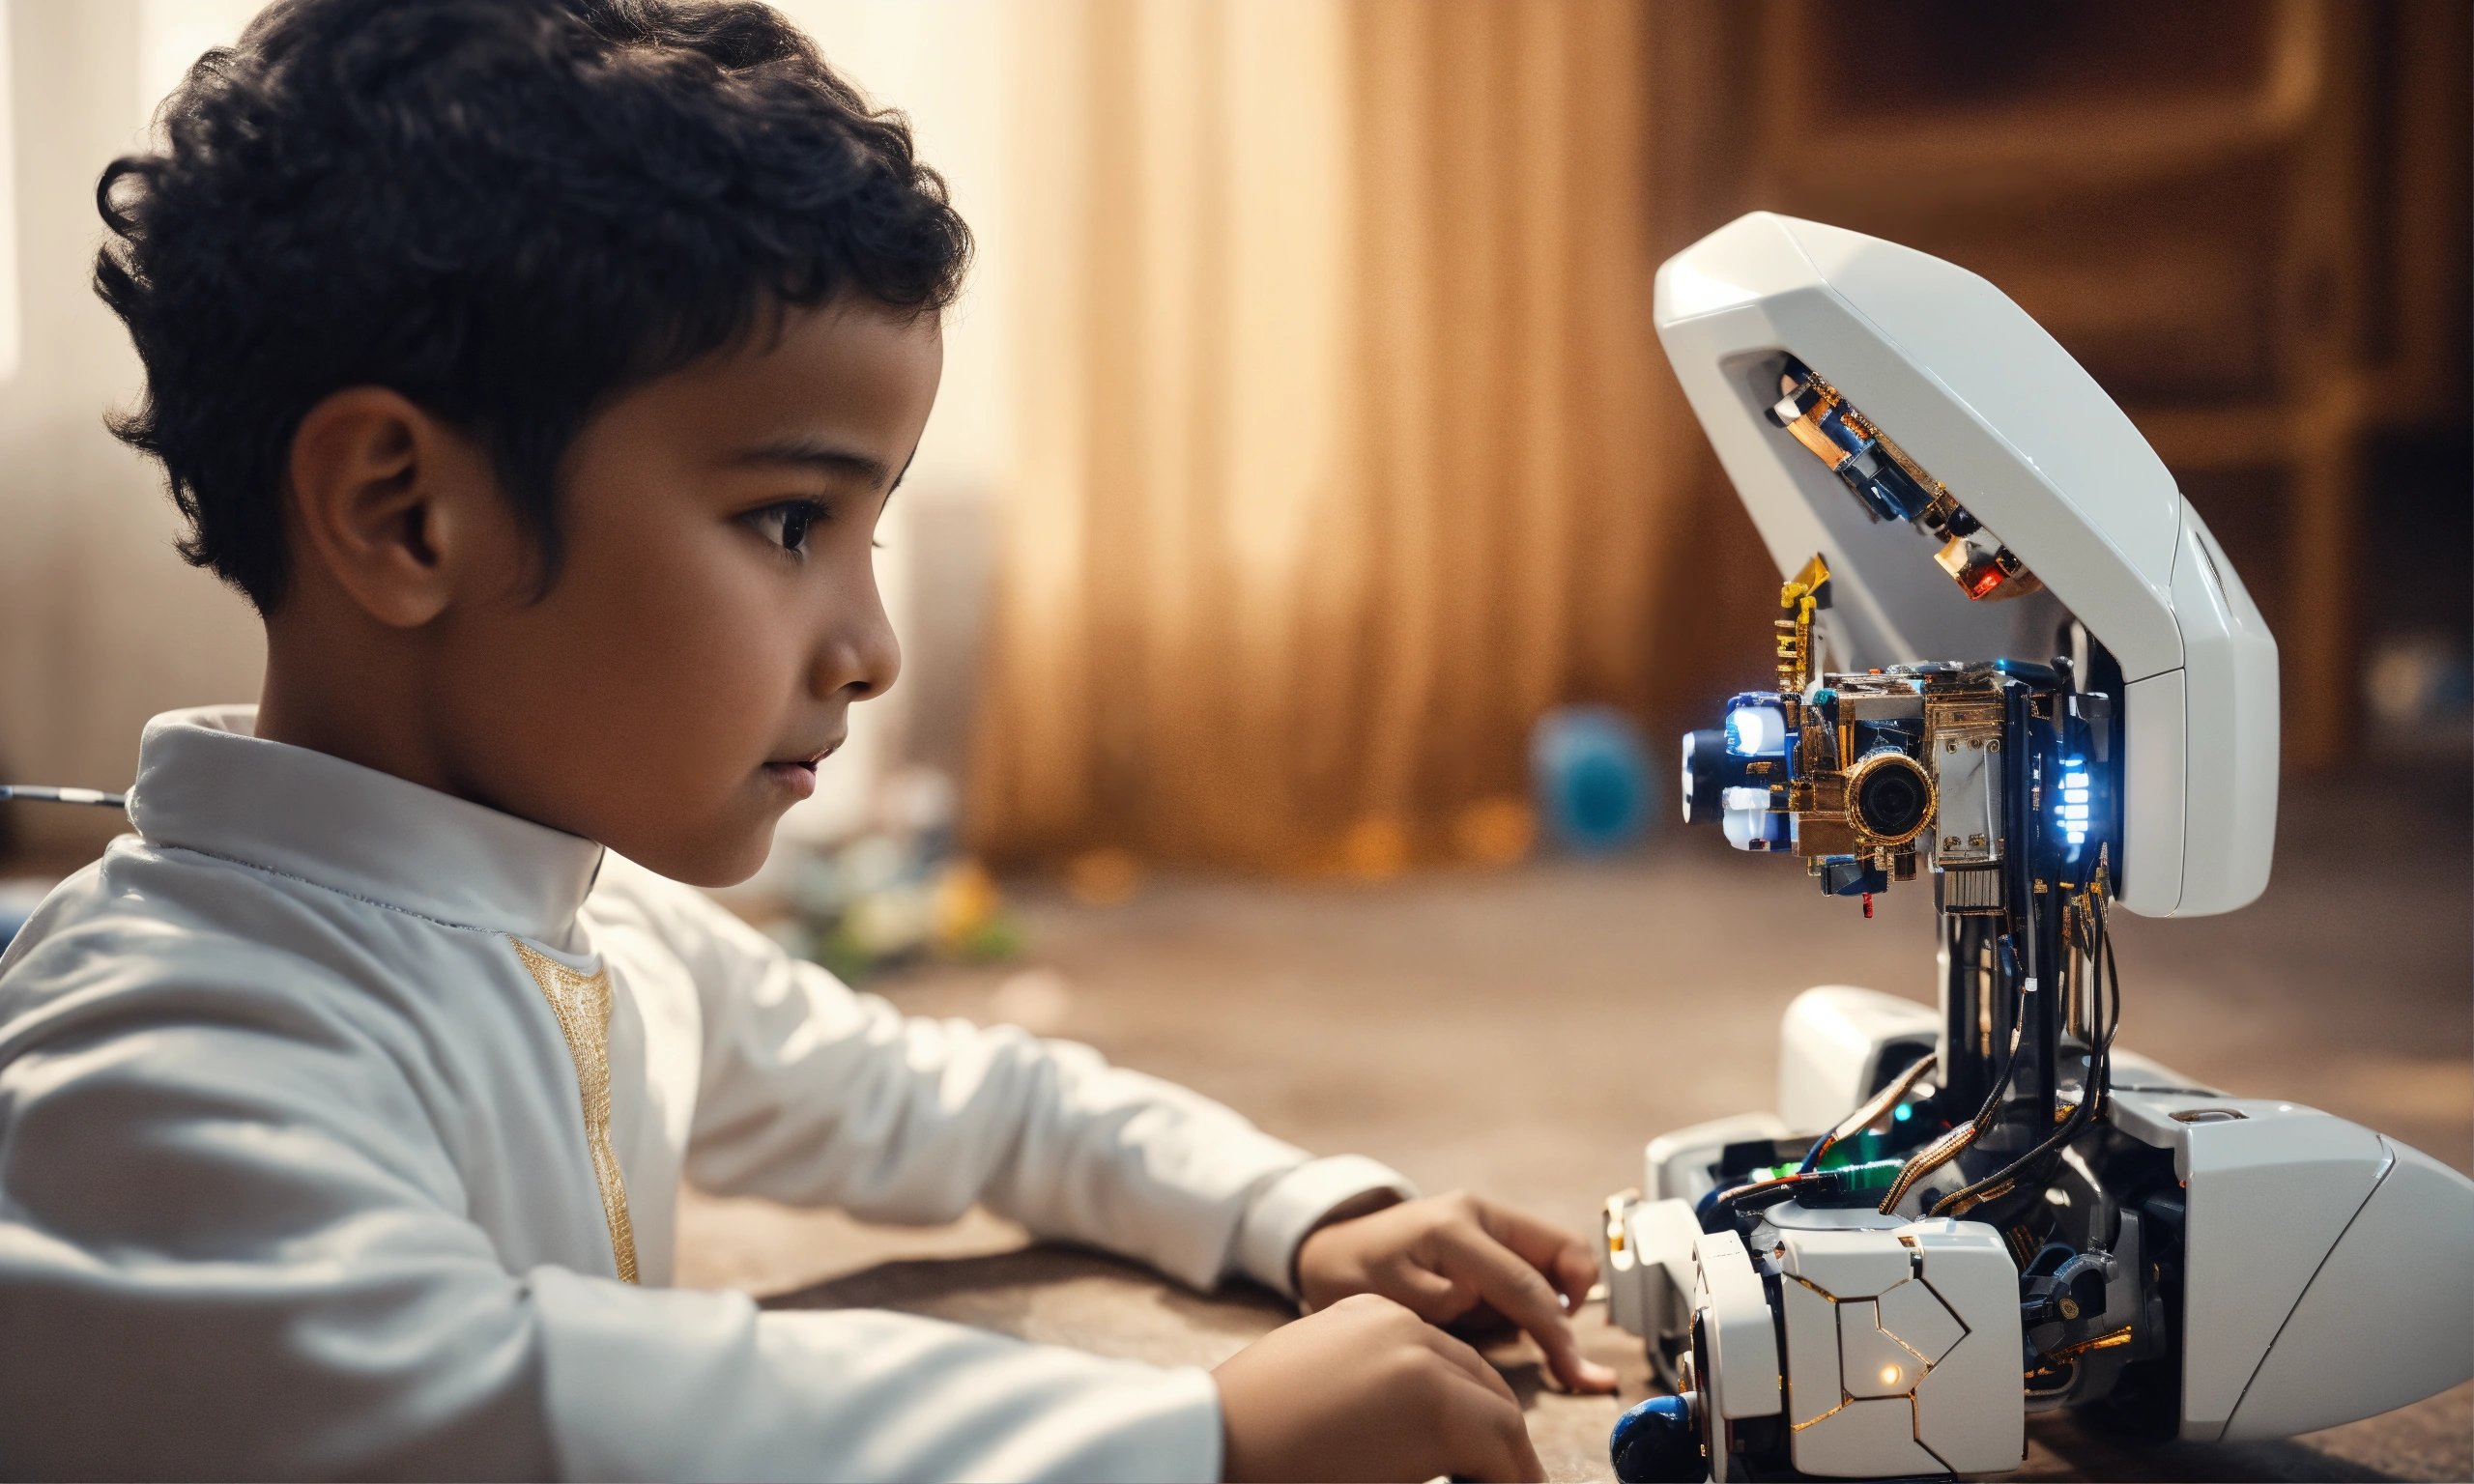 Coding Robots for Elementary Students